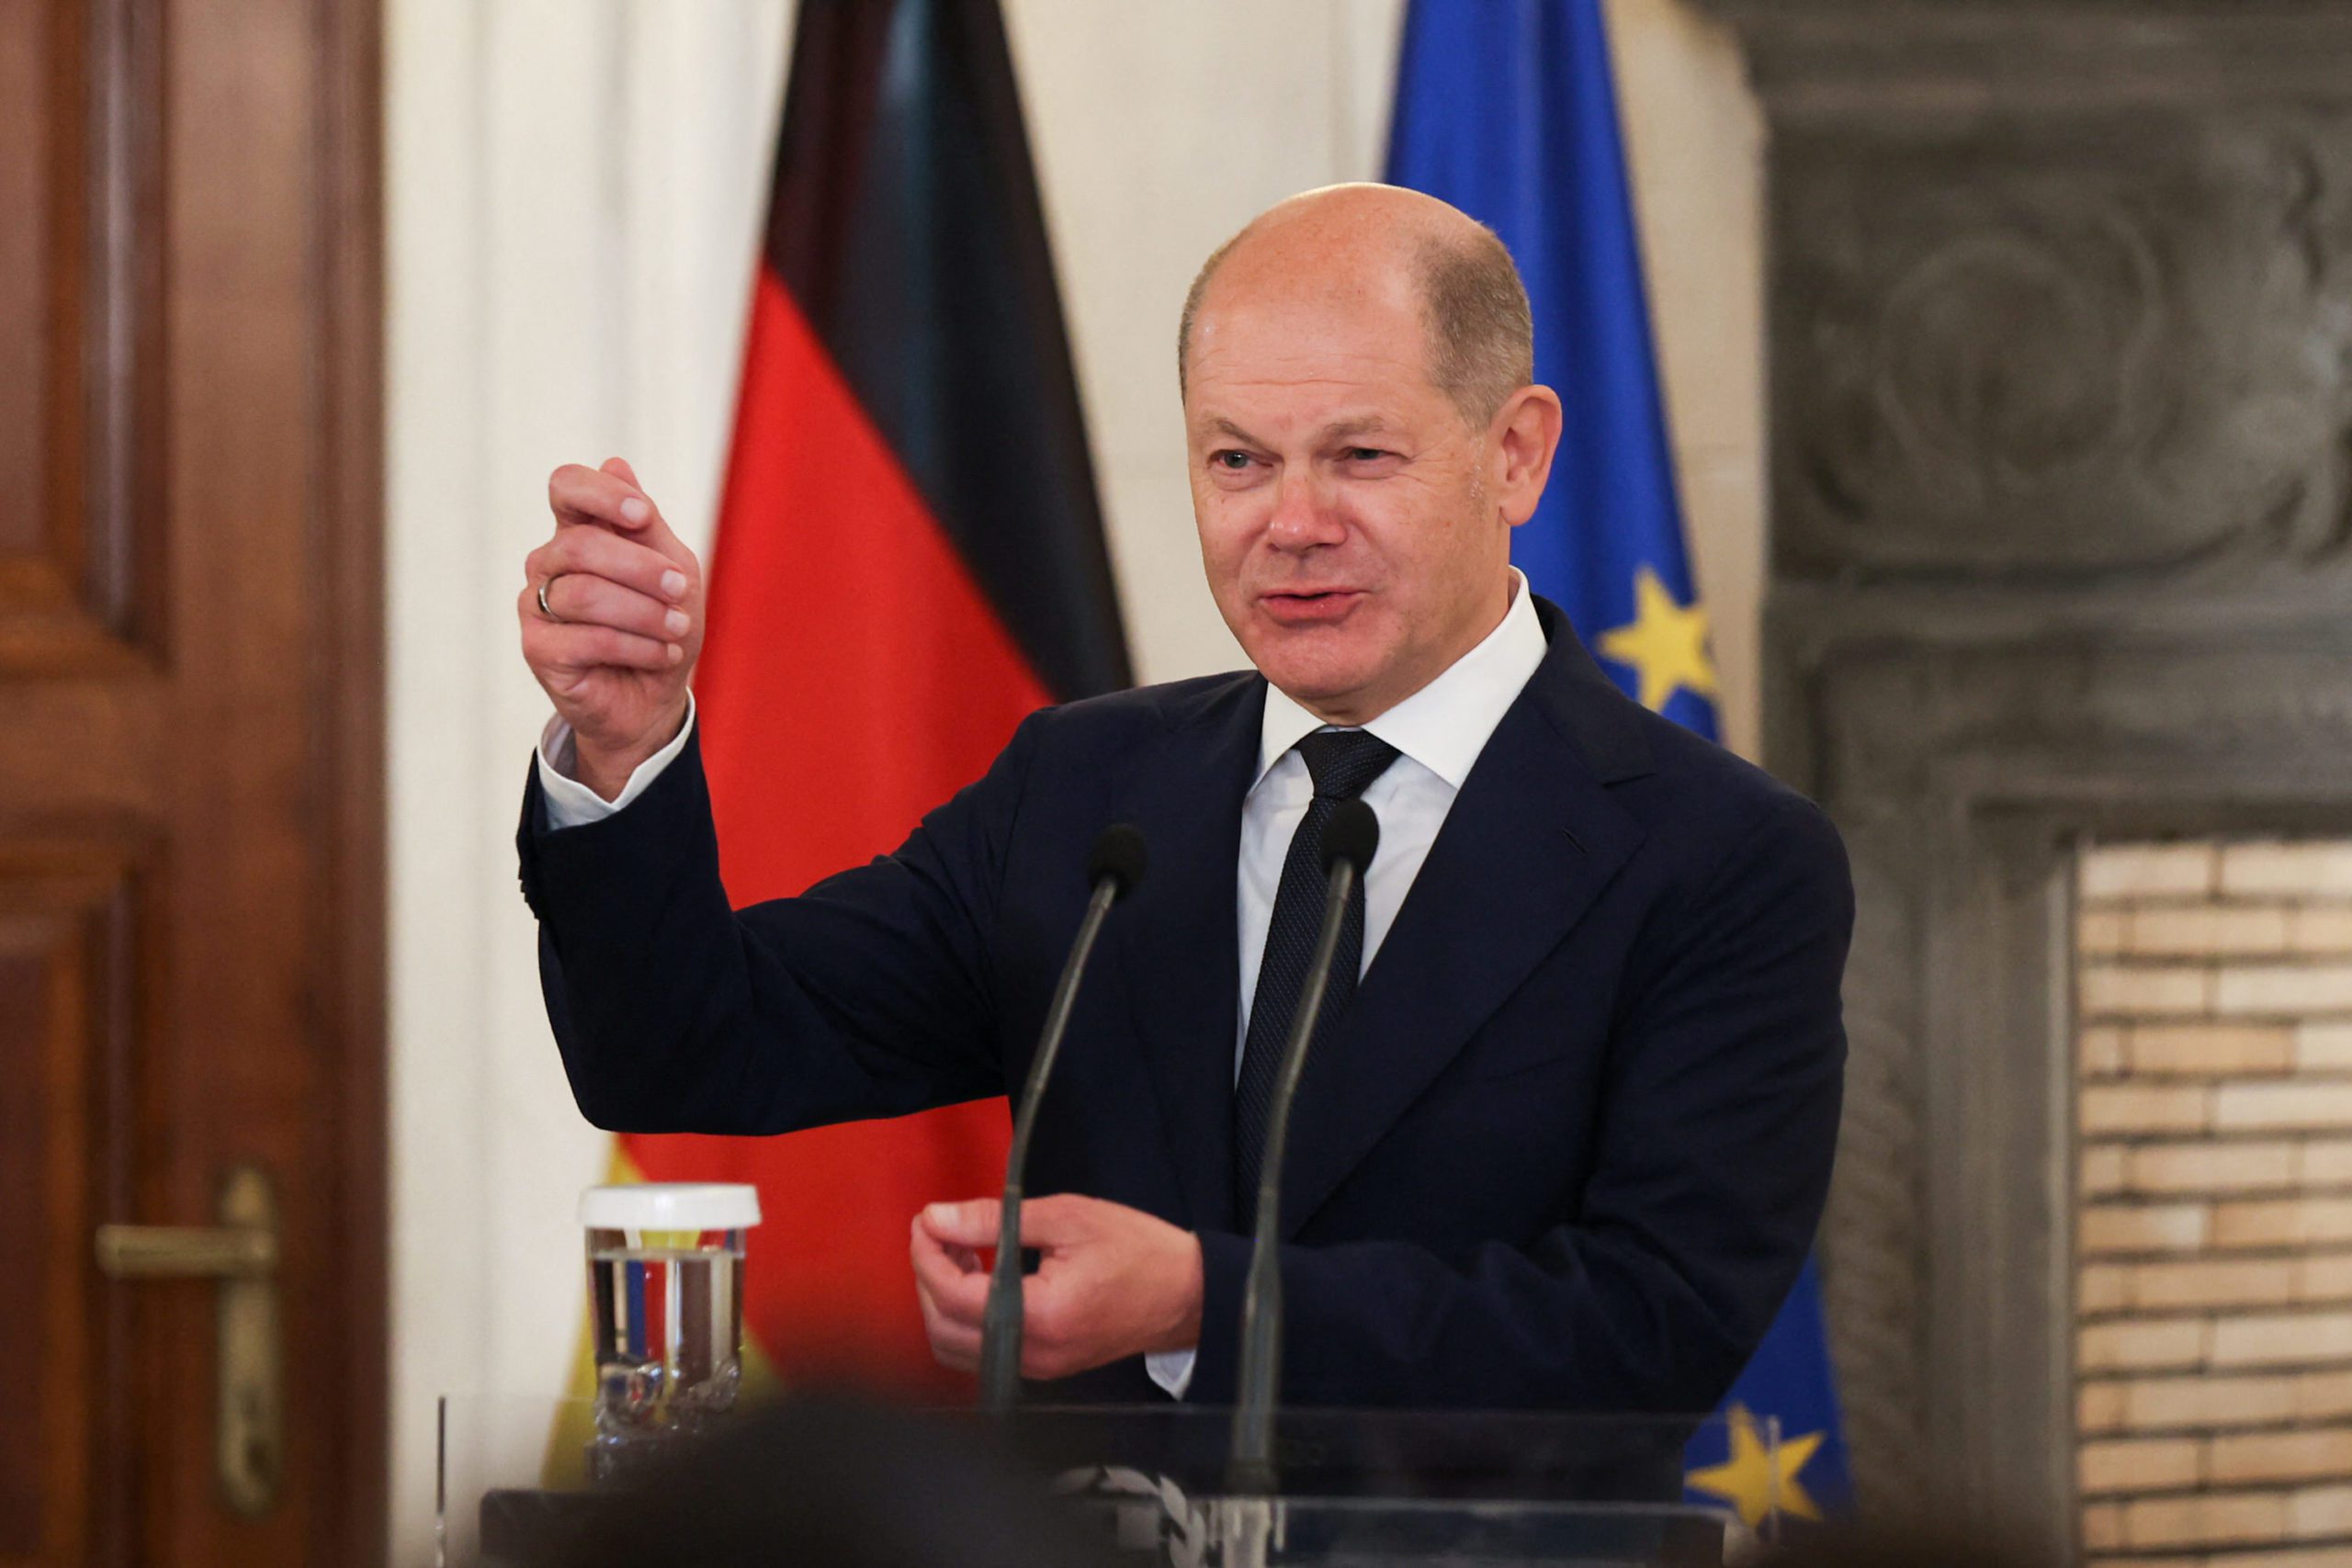 Olaf Scholz Suggests Europe Should ‘Diversify’ By Selling More Ports To China